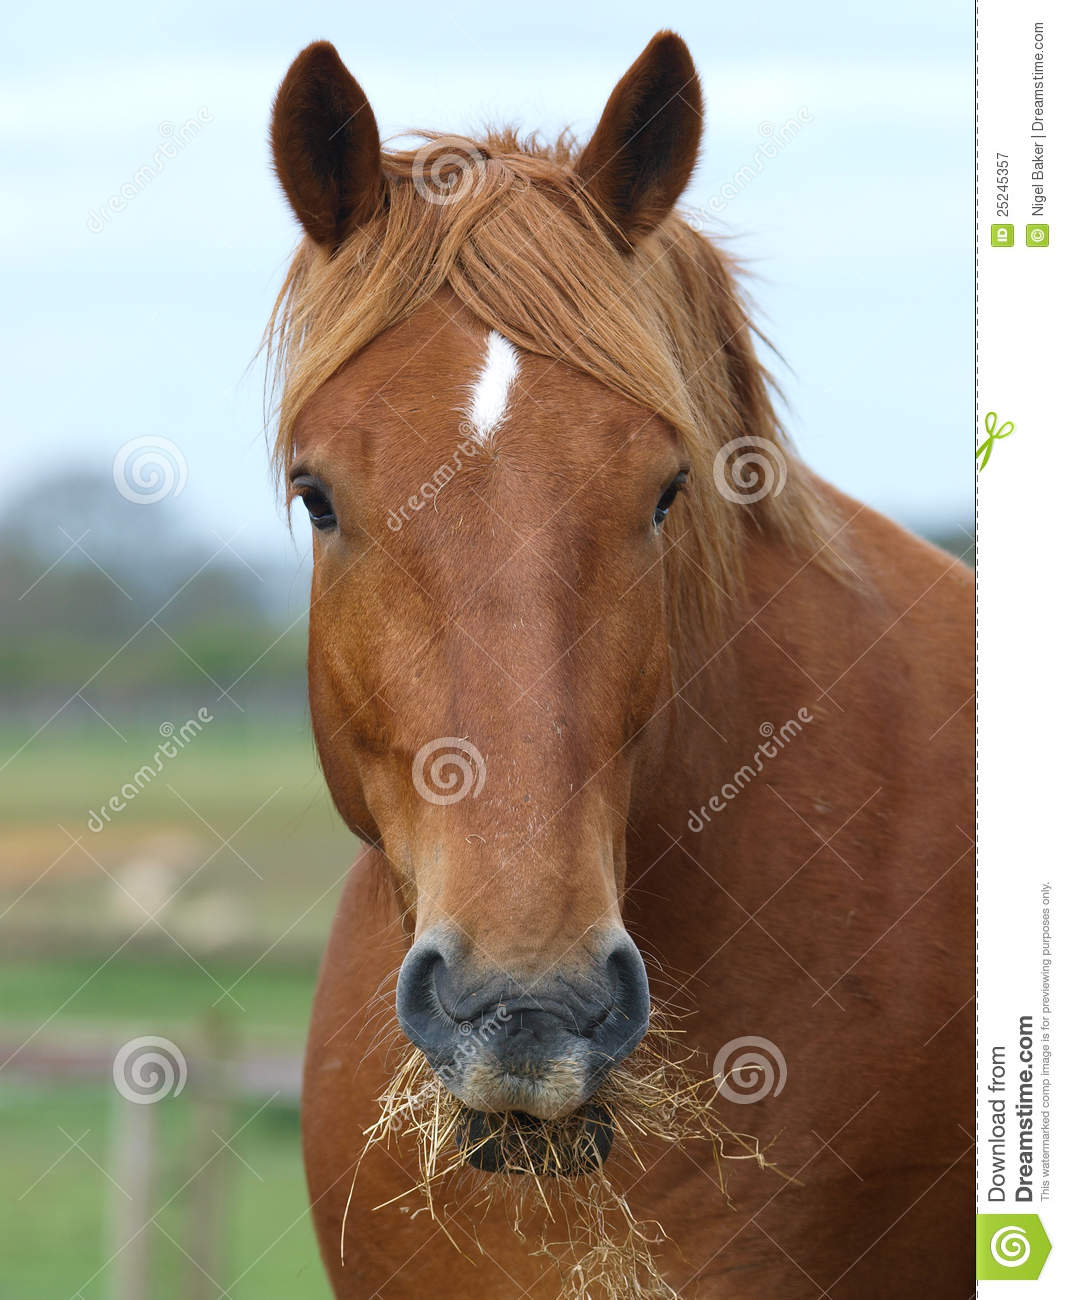 Horse Eating Hay Royalty Free Stock Photography   Image  25245357